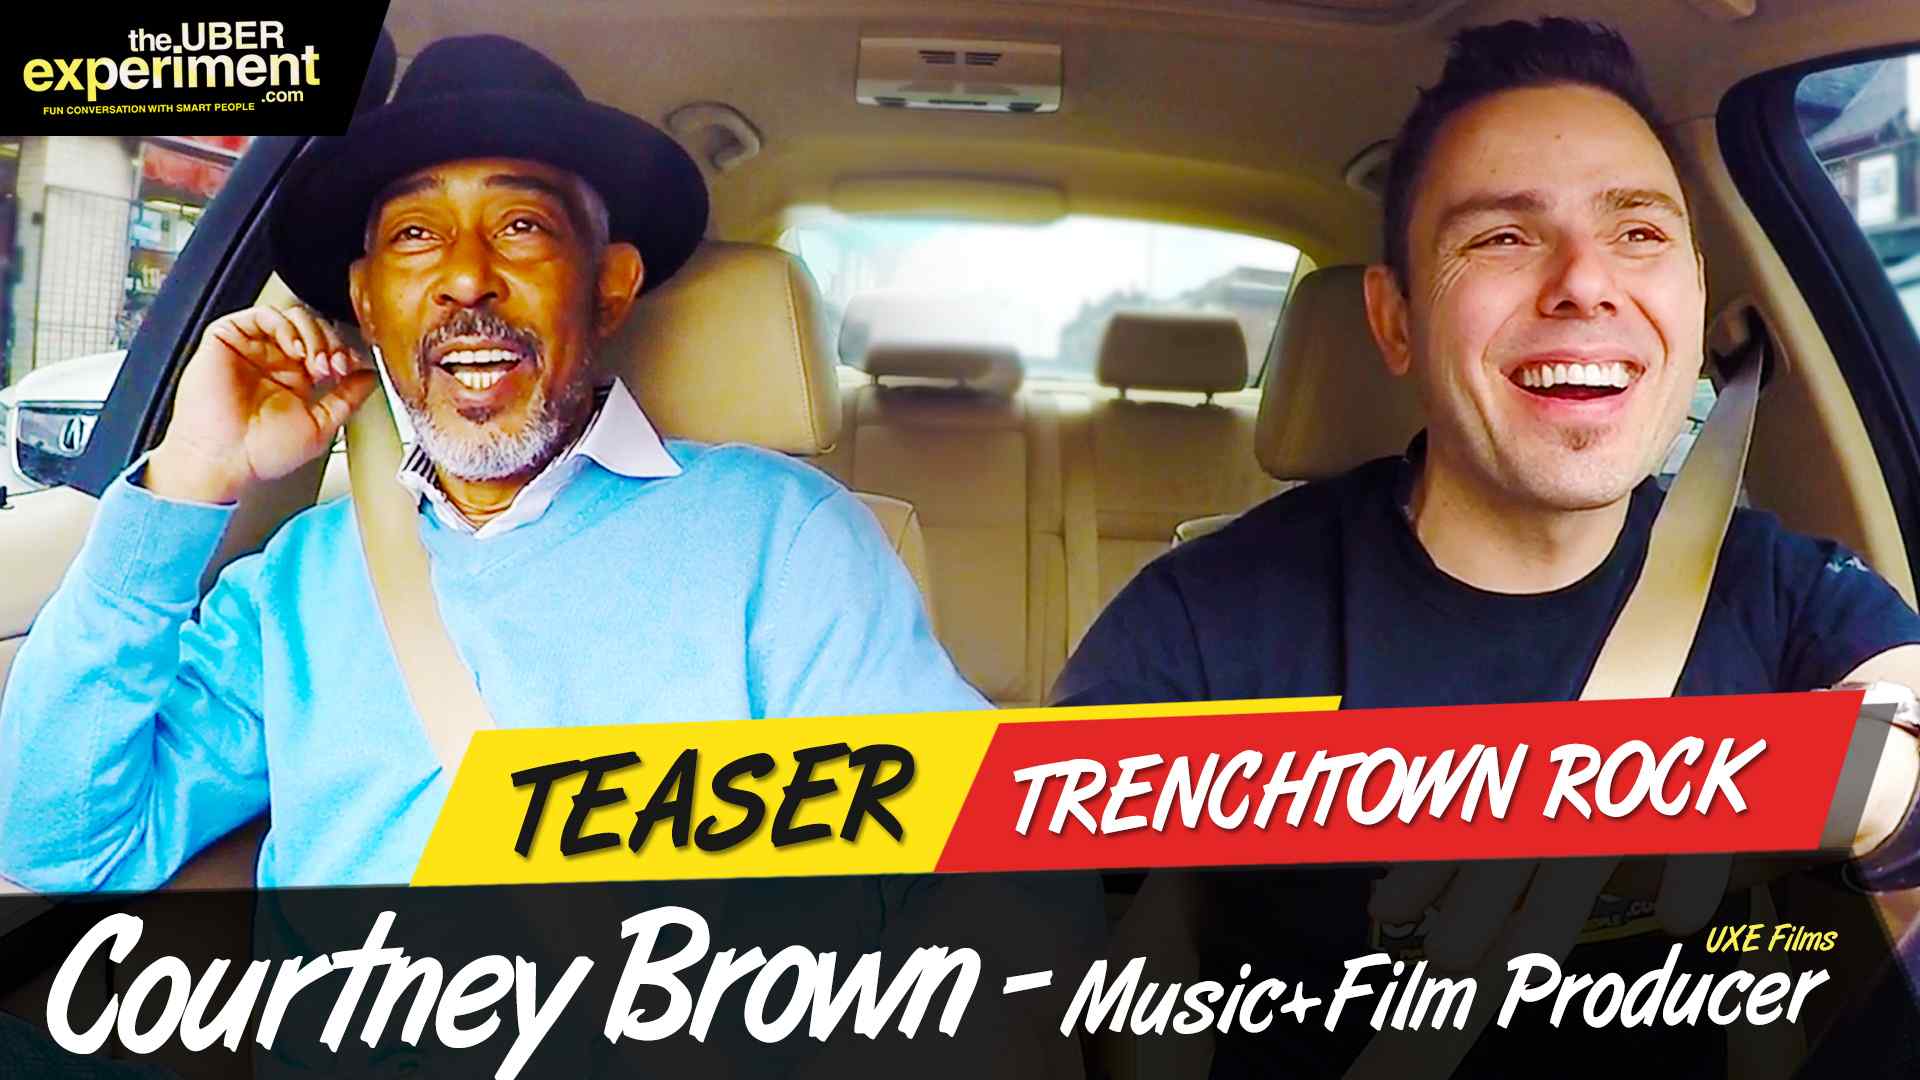 TRENCHTOWN ROCK - Music & Film Producer Courtney Brown rides The UBER Experiment Reality Show